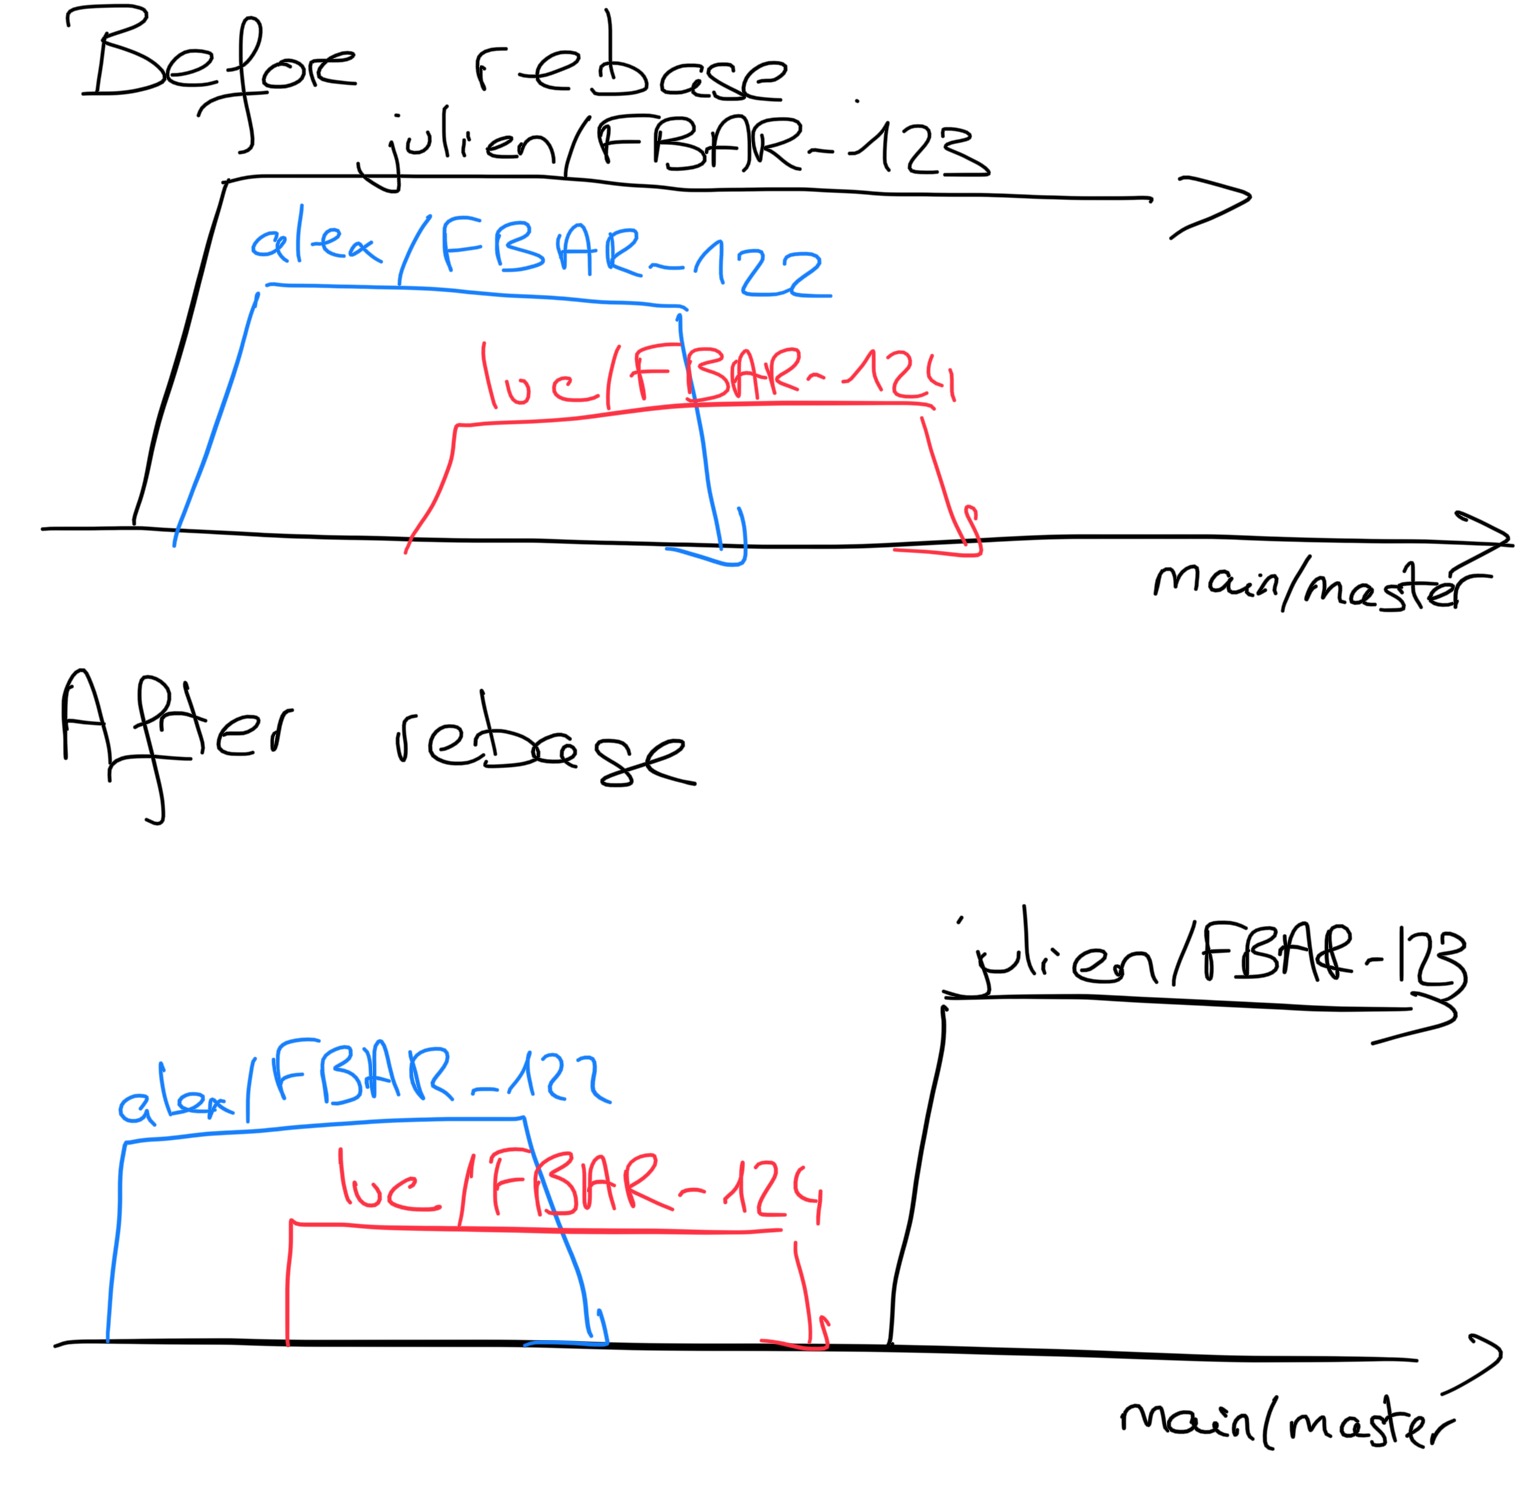 Before/After rebase